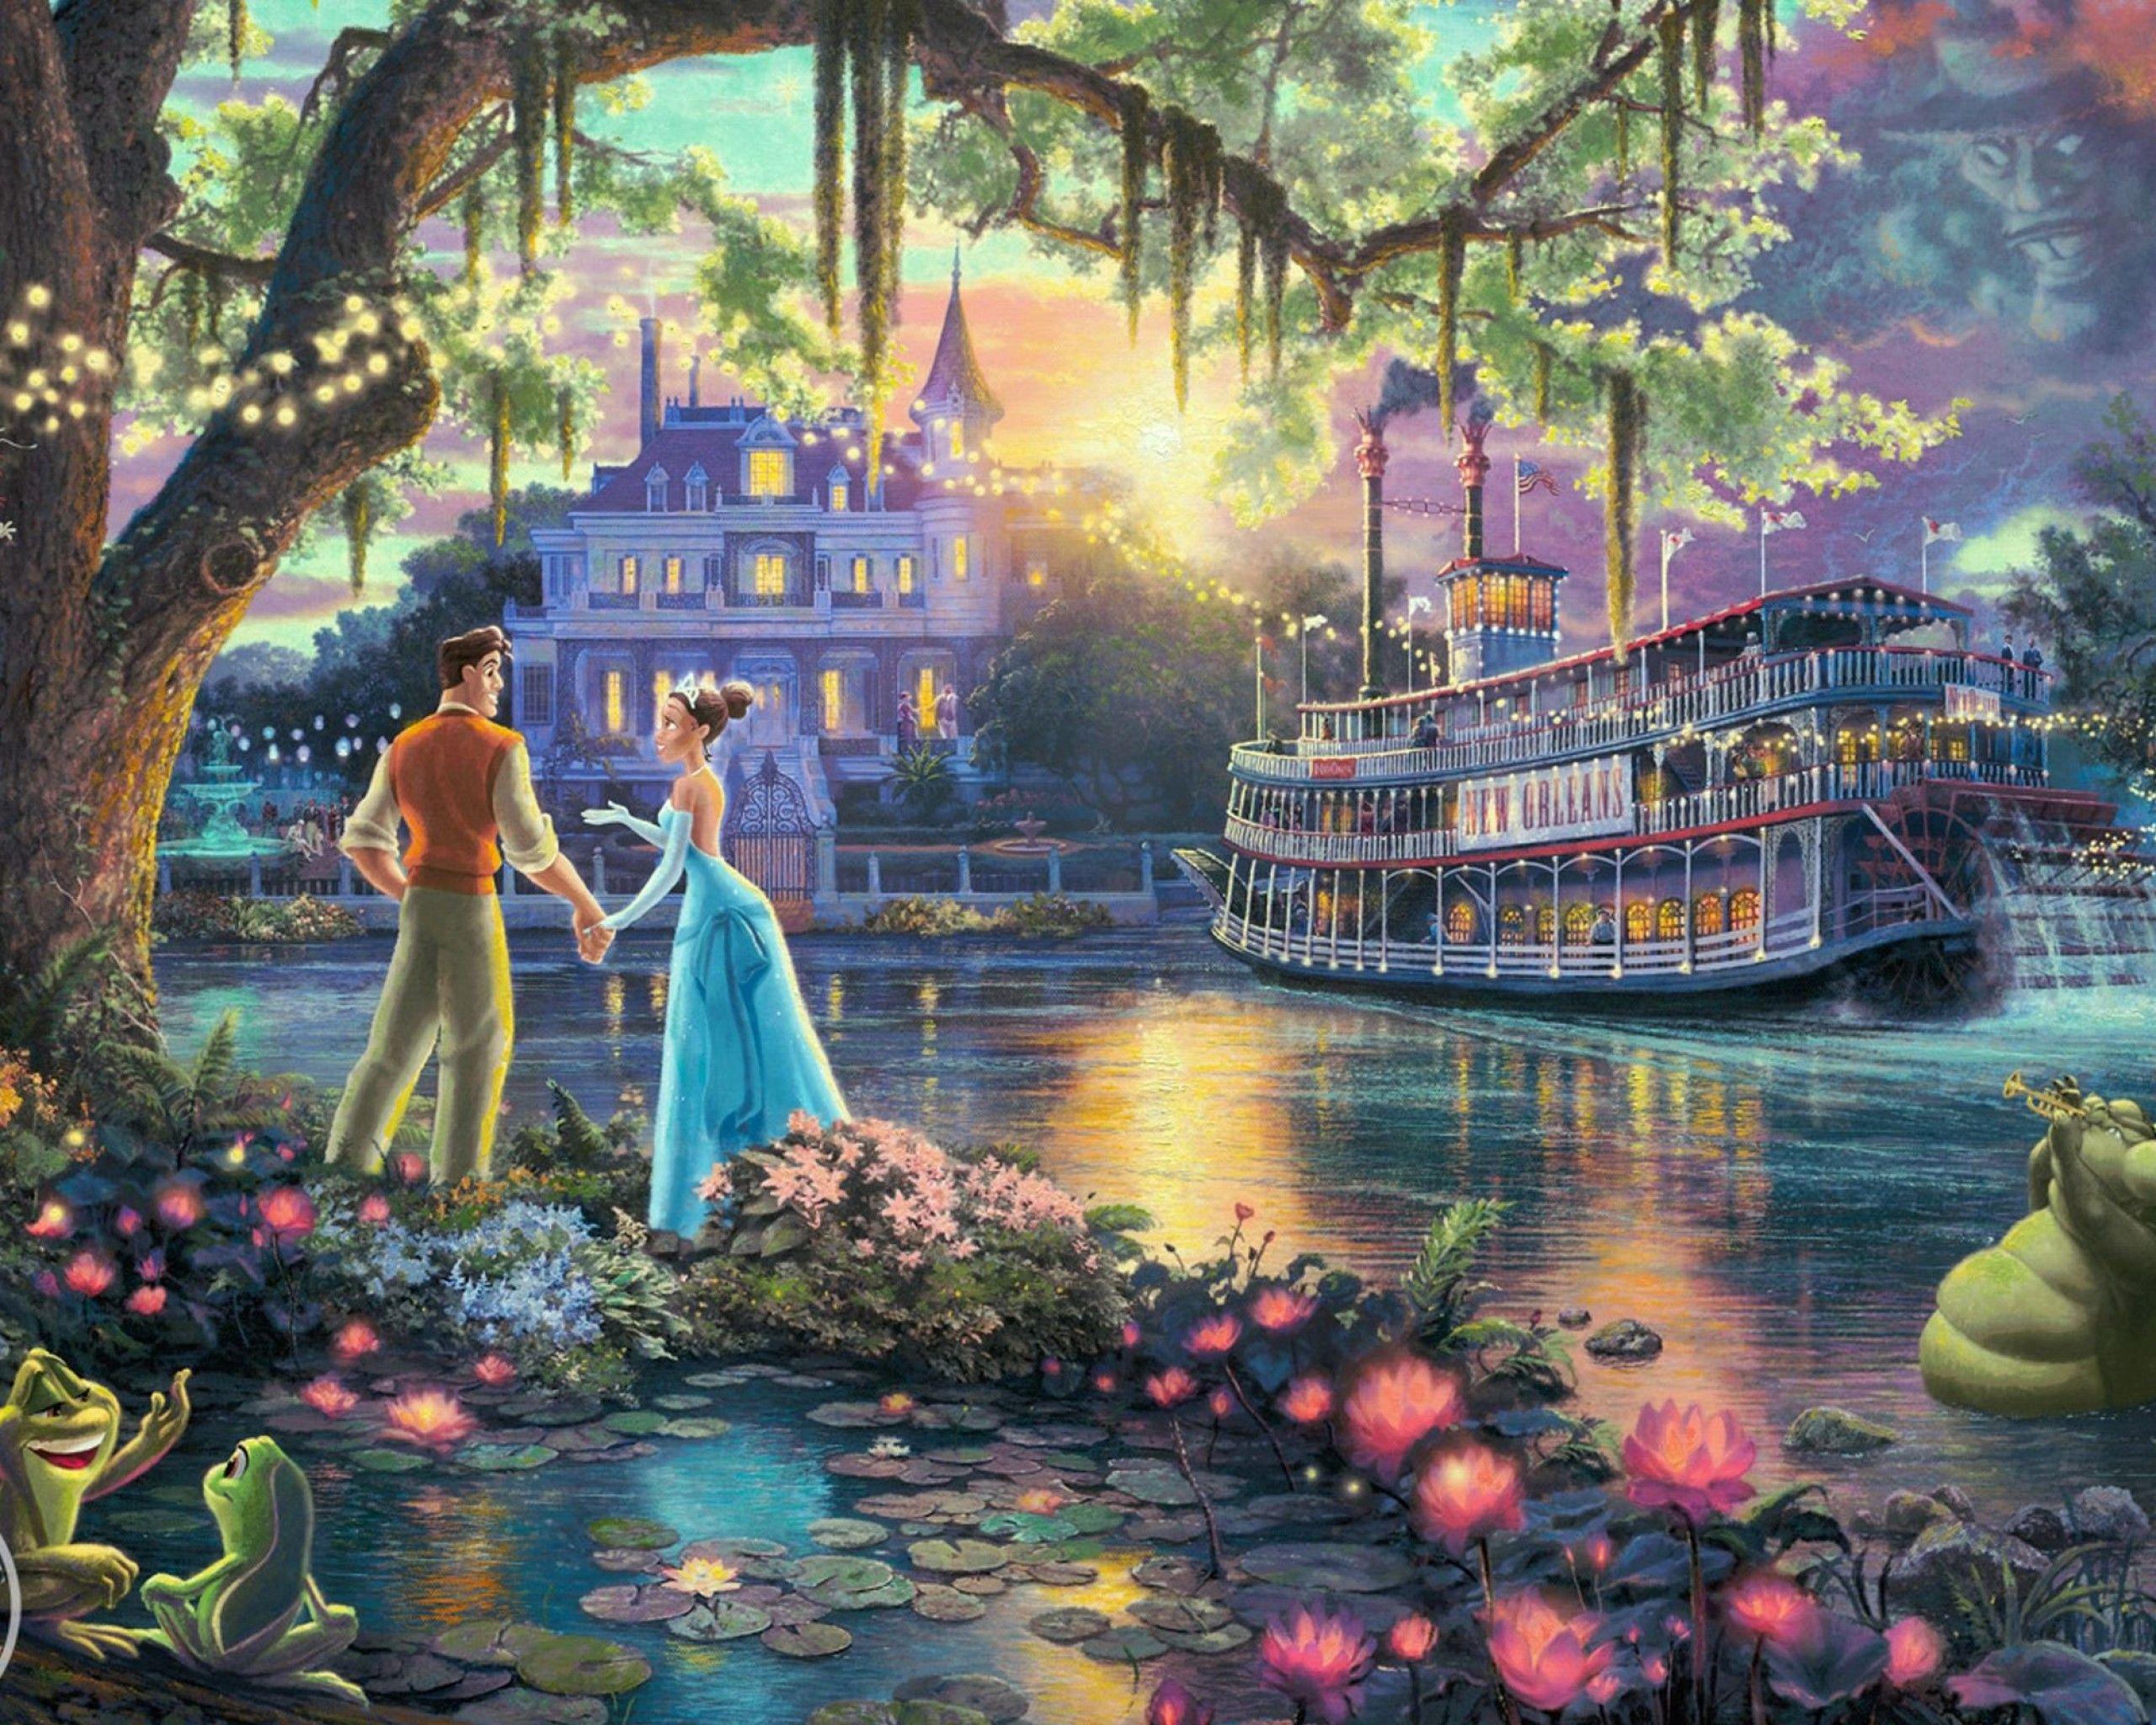 Tiana and Naveen after wedding the princess and the frog wallpaper